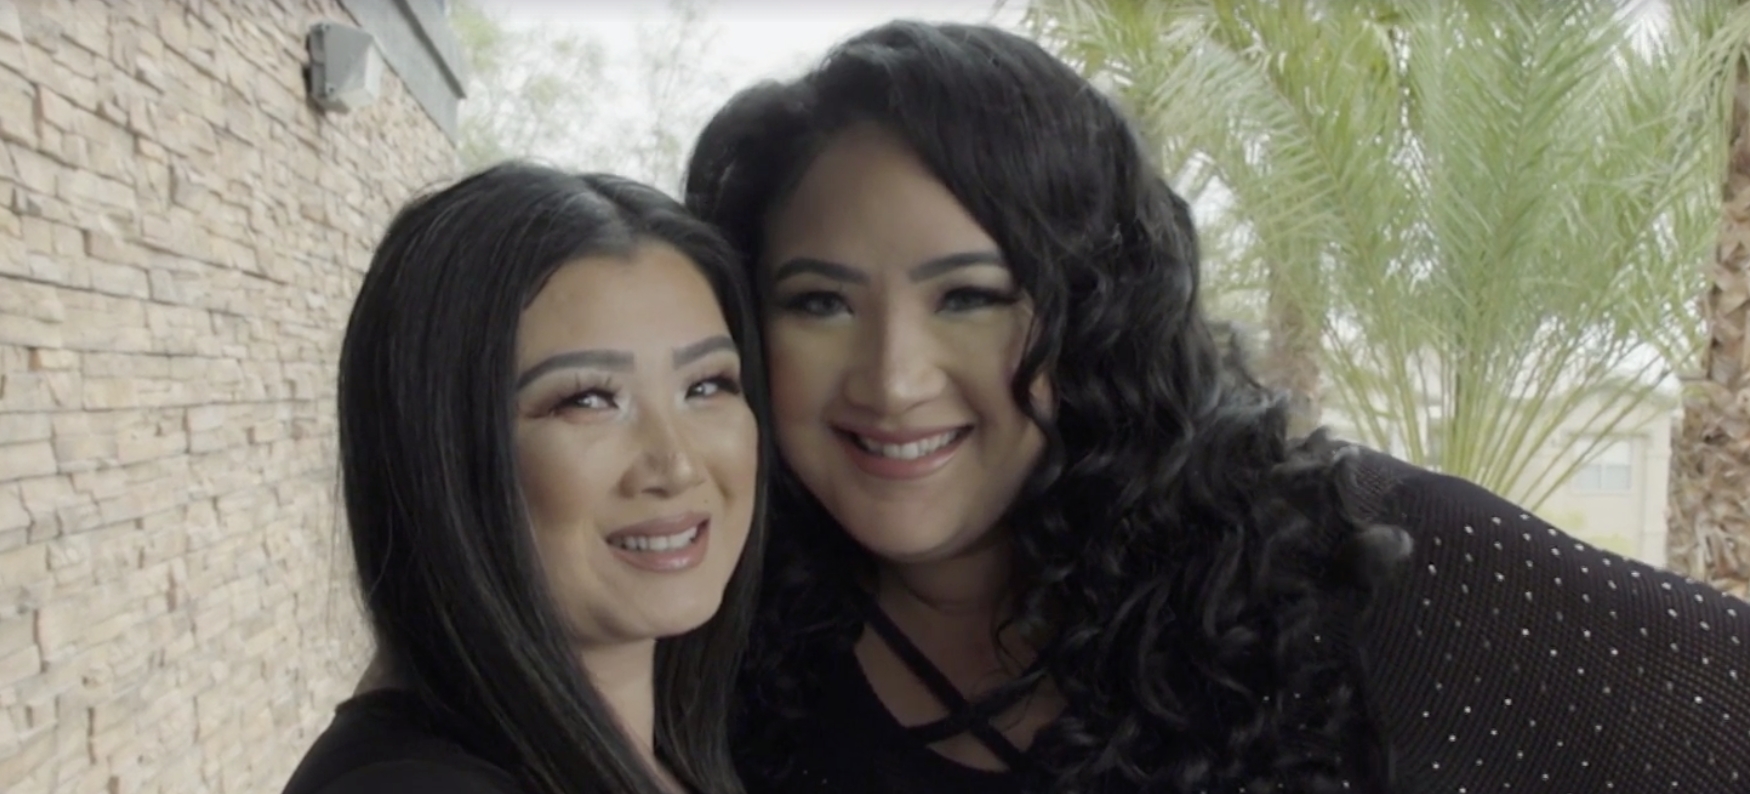 sMothered': Who Is Angelica? Get to Know Her and Mom Sunhe